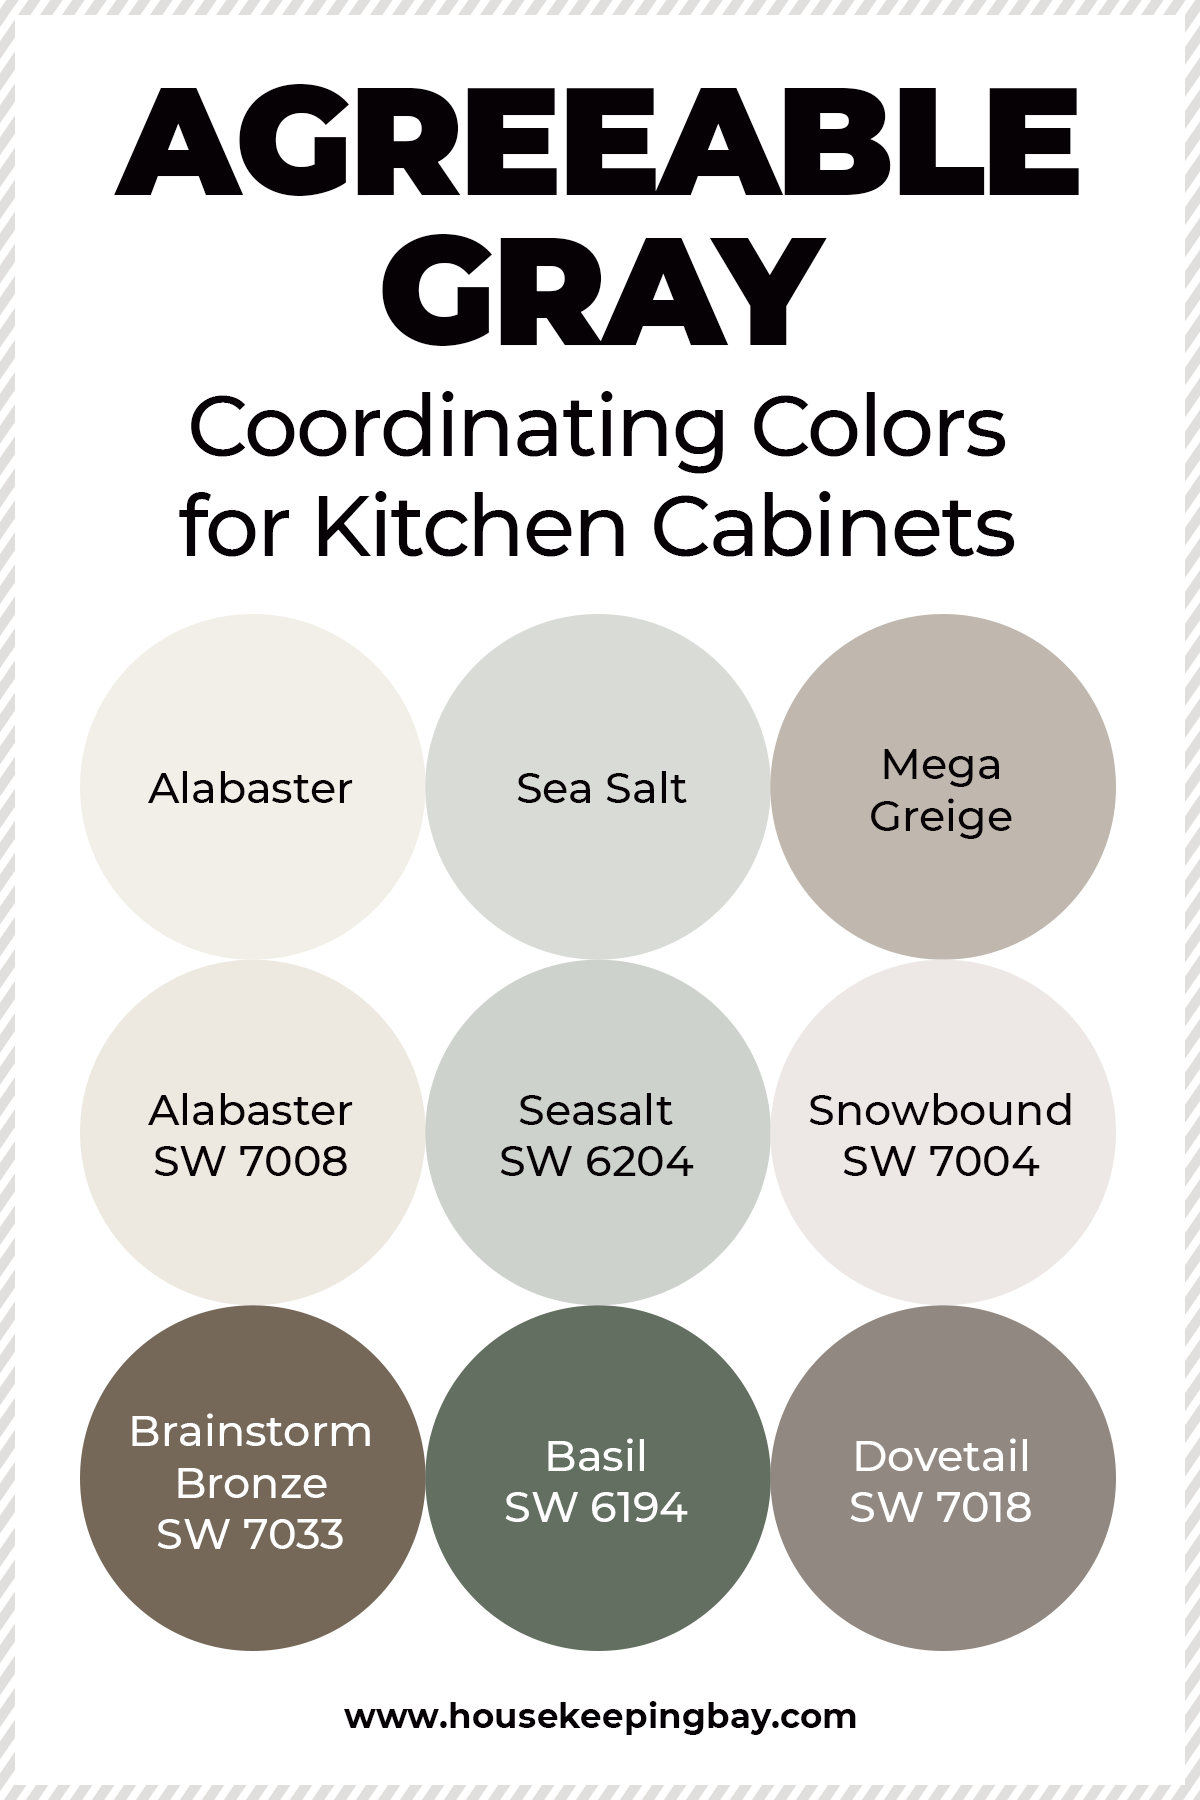 Agreeable gray coordinating colors for kitchen cabinets